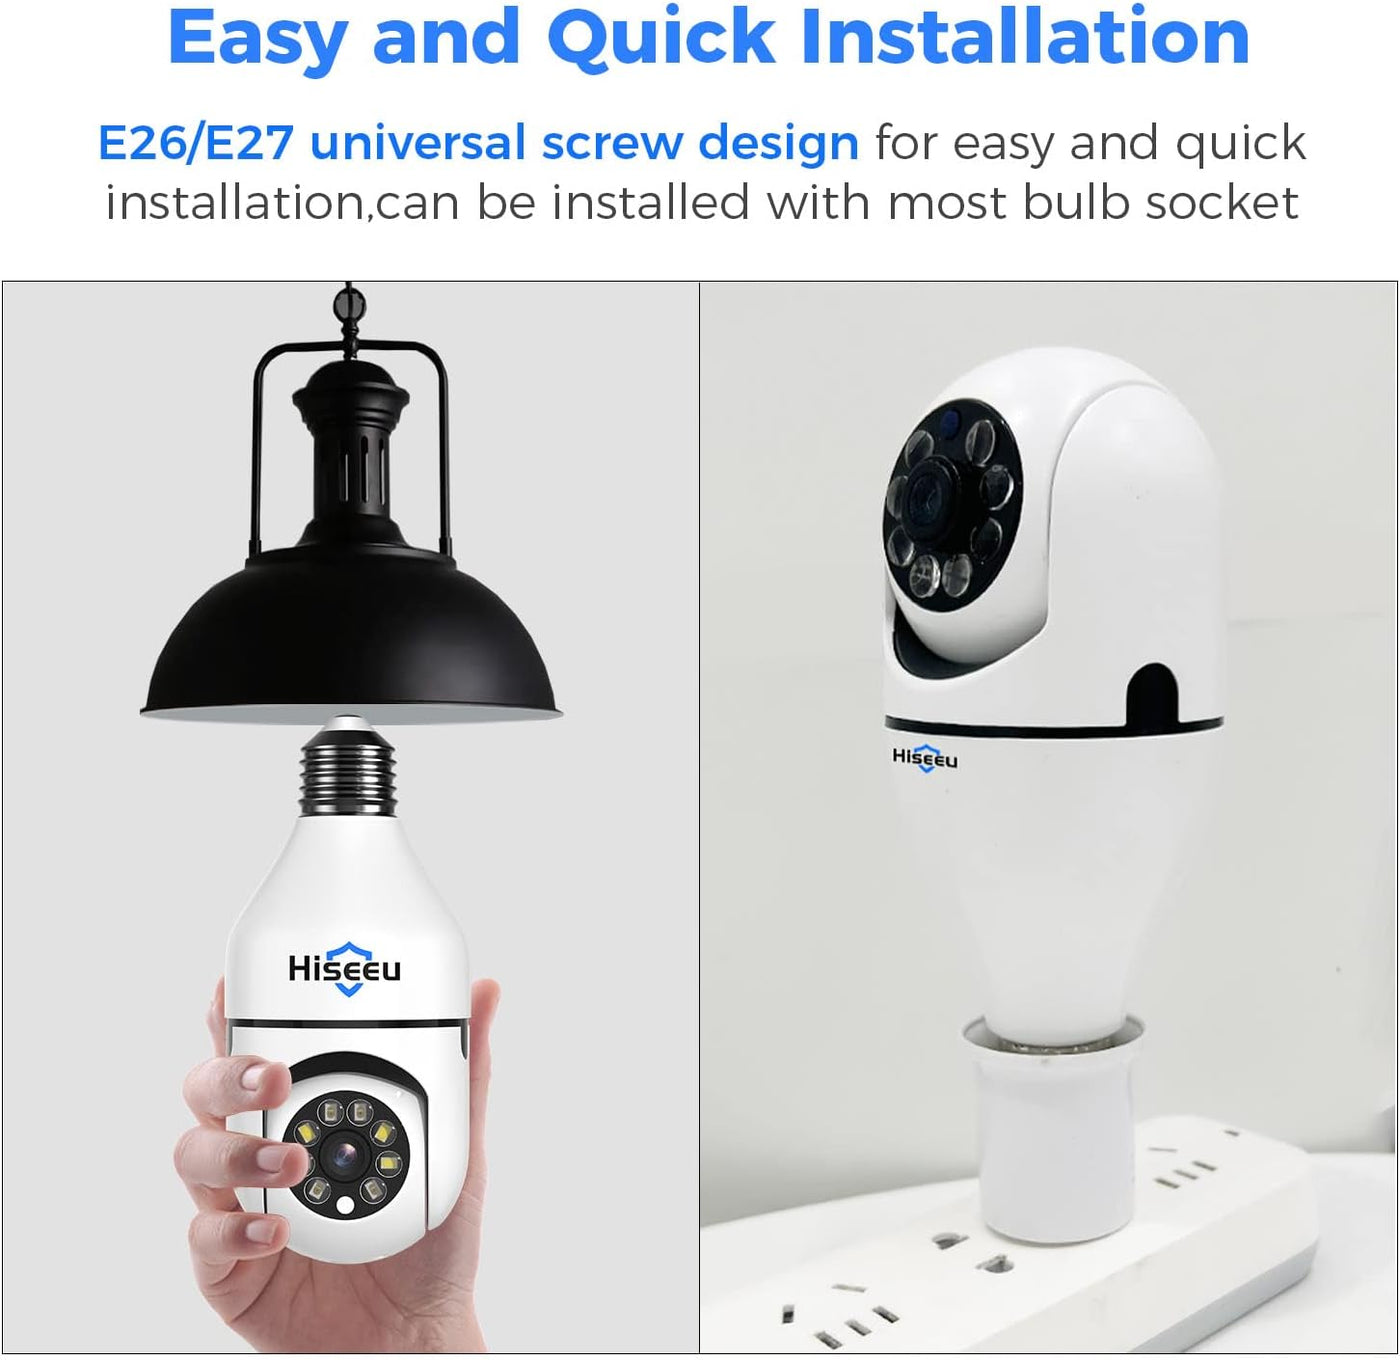 Wireless Light Bulb Camera, 2.4GHz WiFi Bulb Camera, 2-Way-Audio, Motion Detection and Alarm, 3MP Full Color Night Vision, SD/Cloud Storage, Work with Alexa, E26/E27 Socket